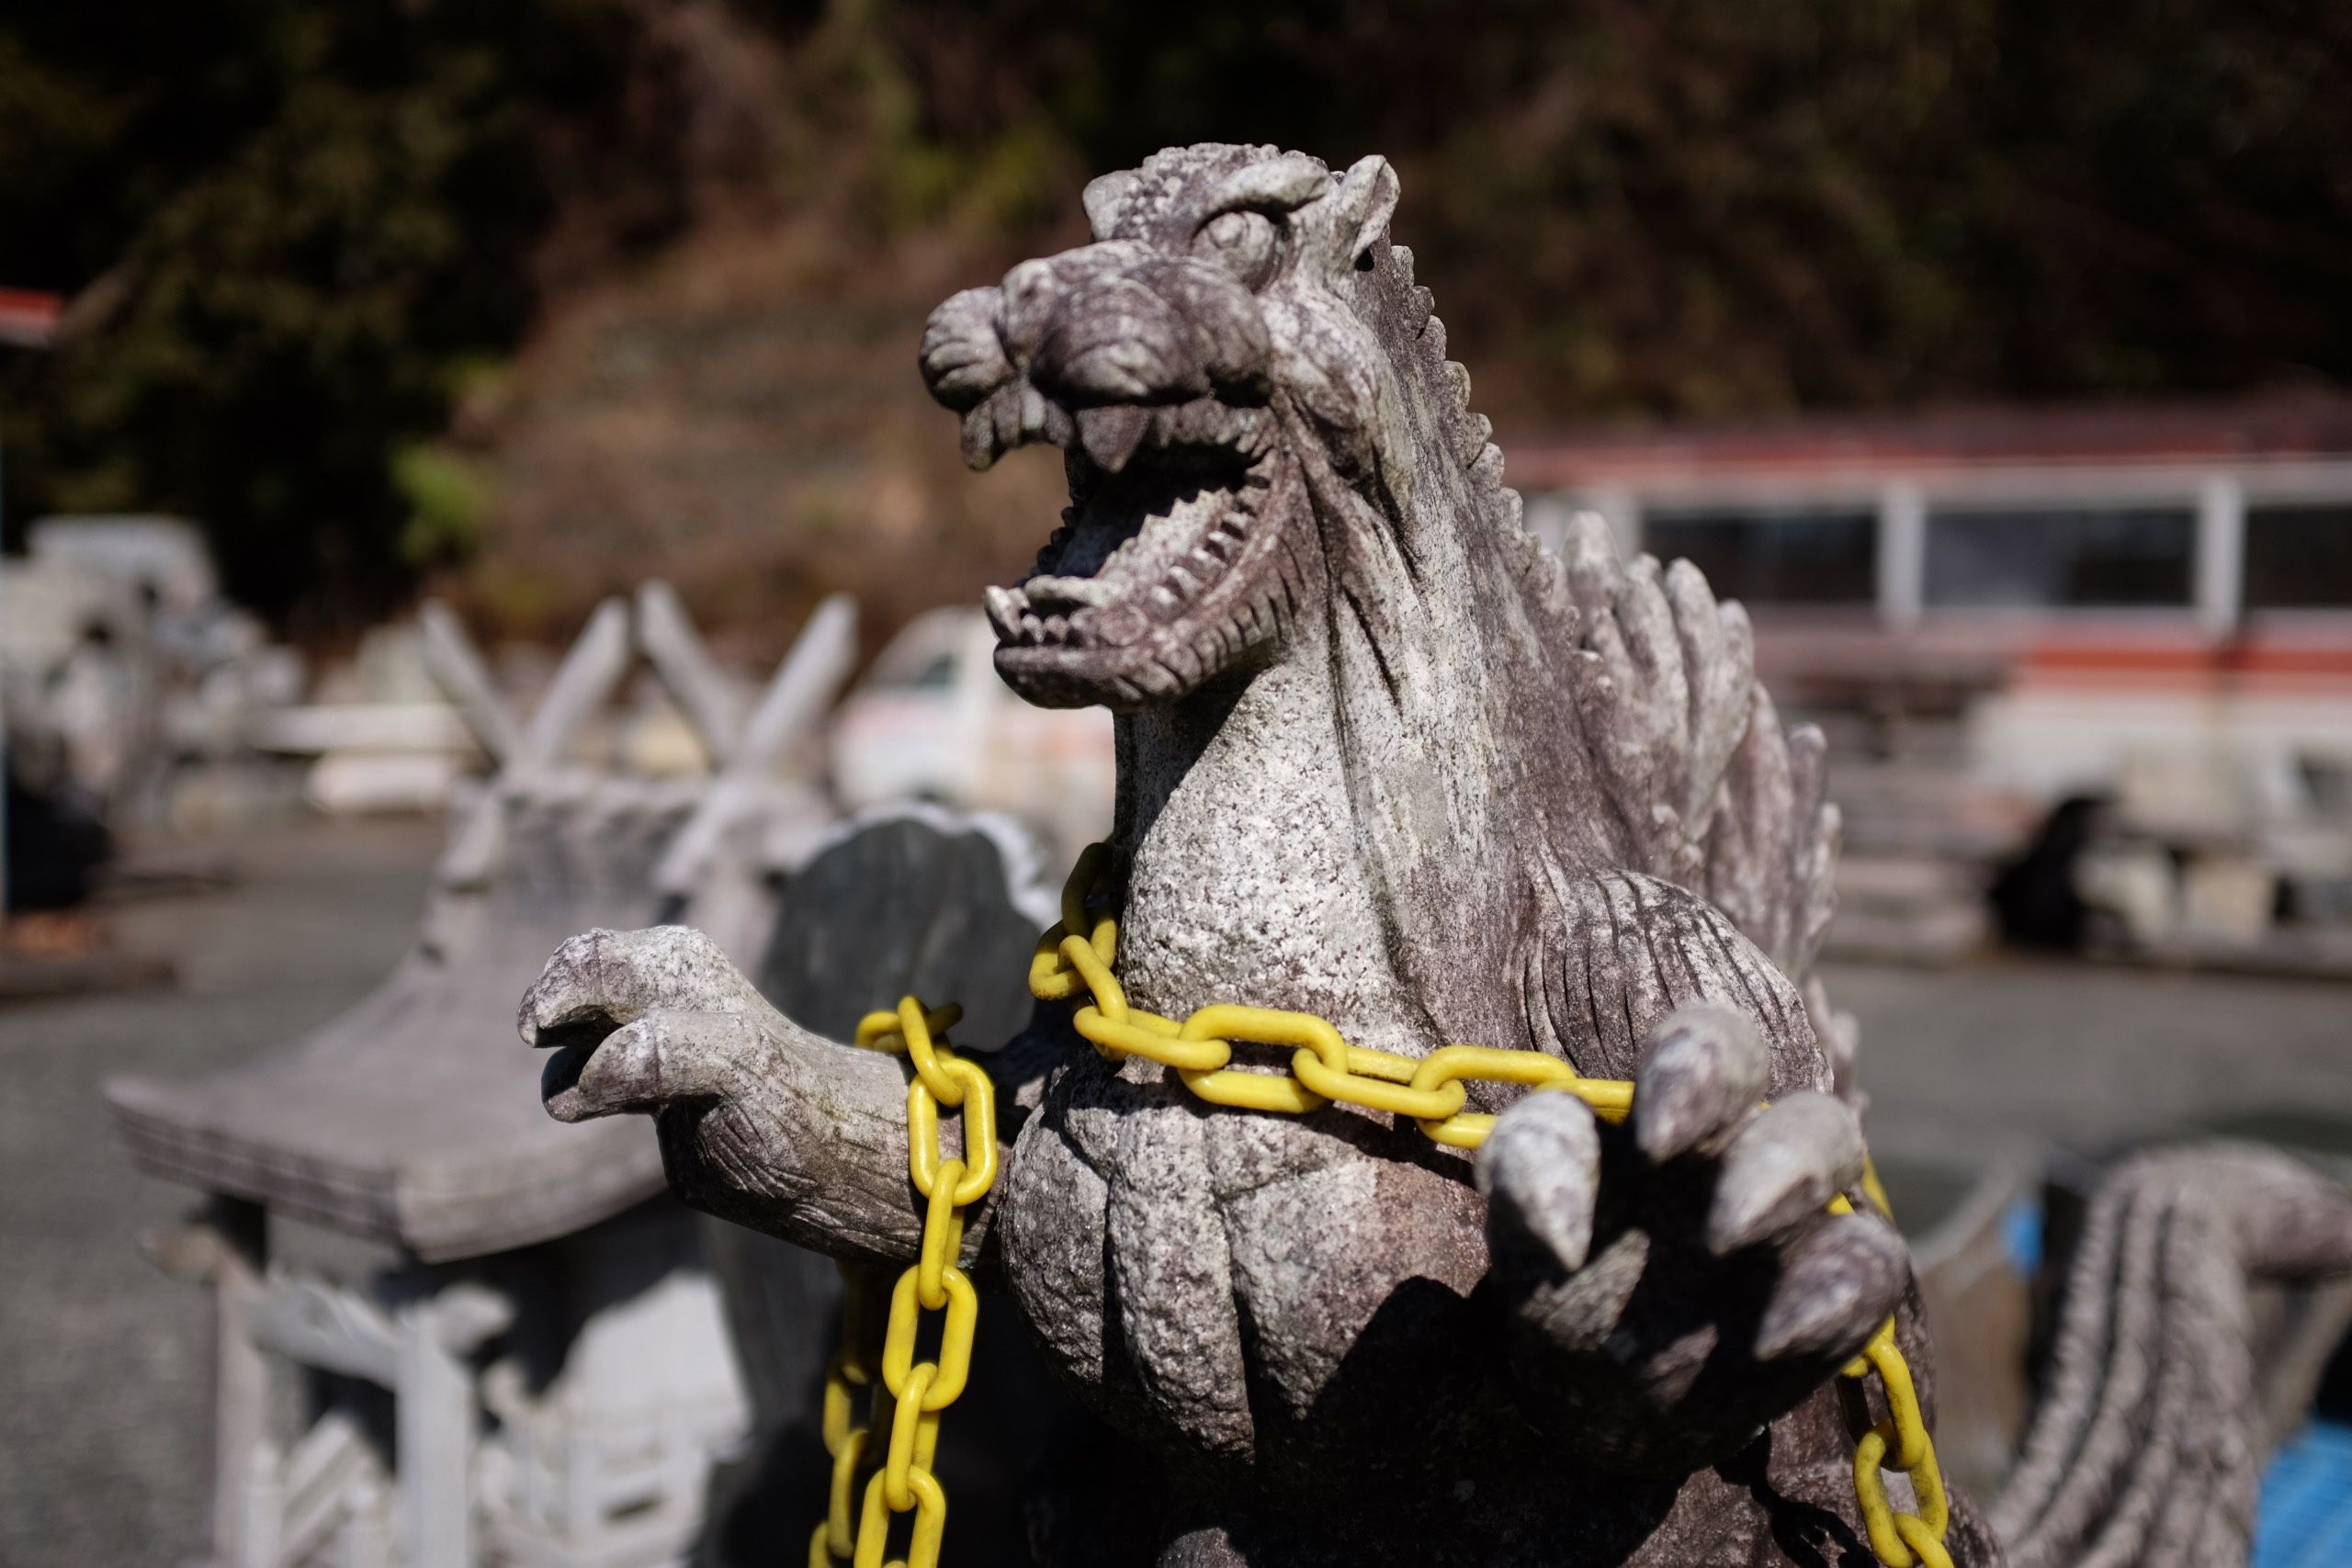 A stone Godzilla statue tied down with a yellow chain.